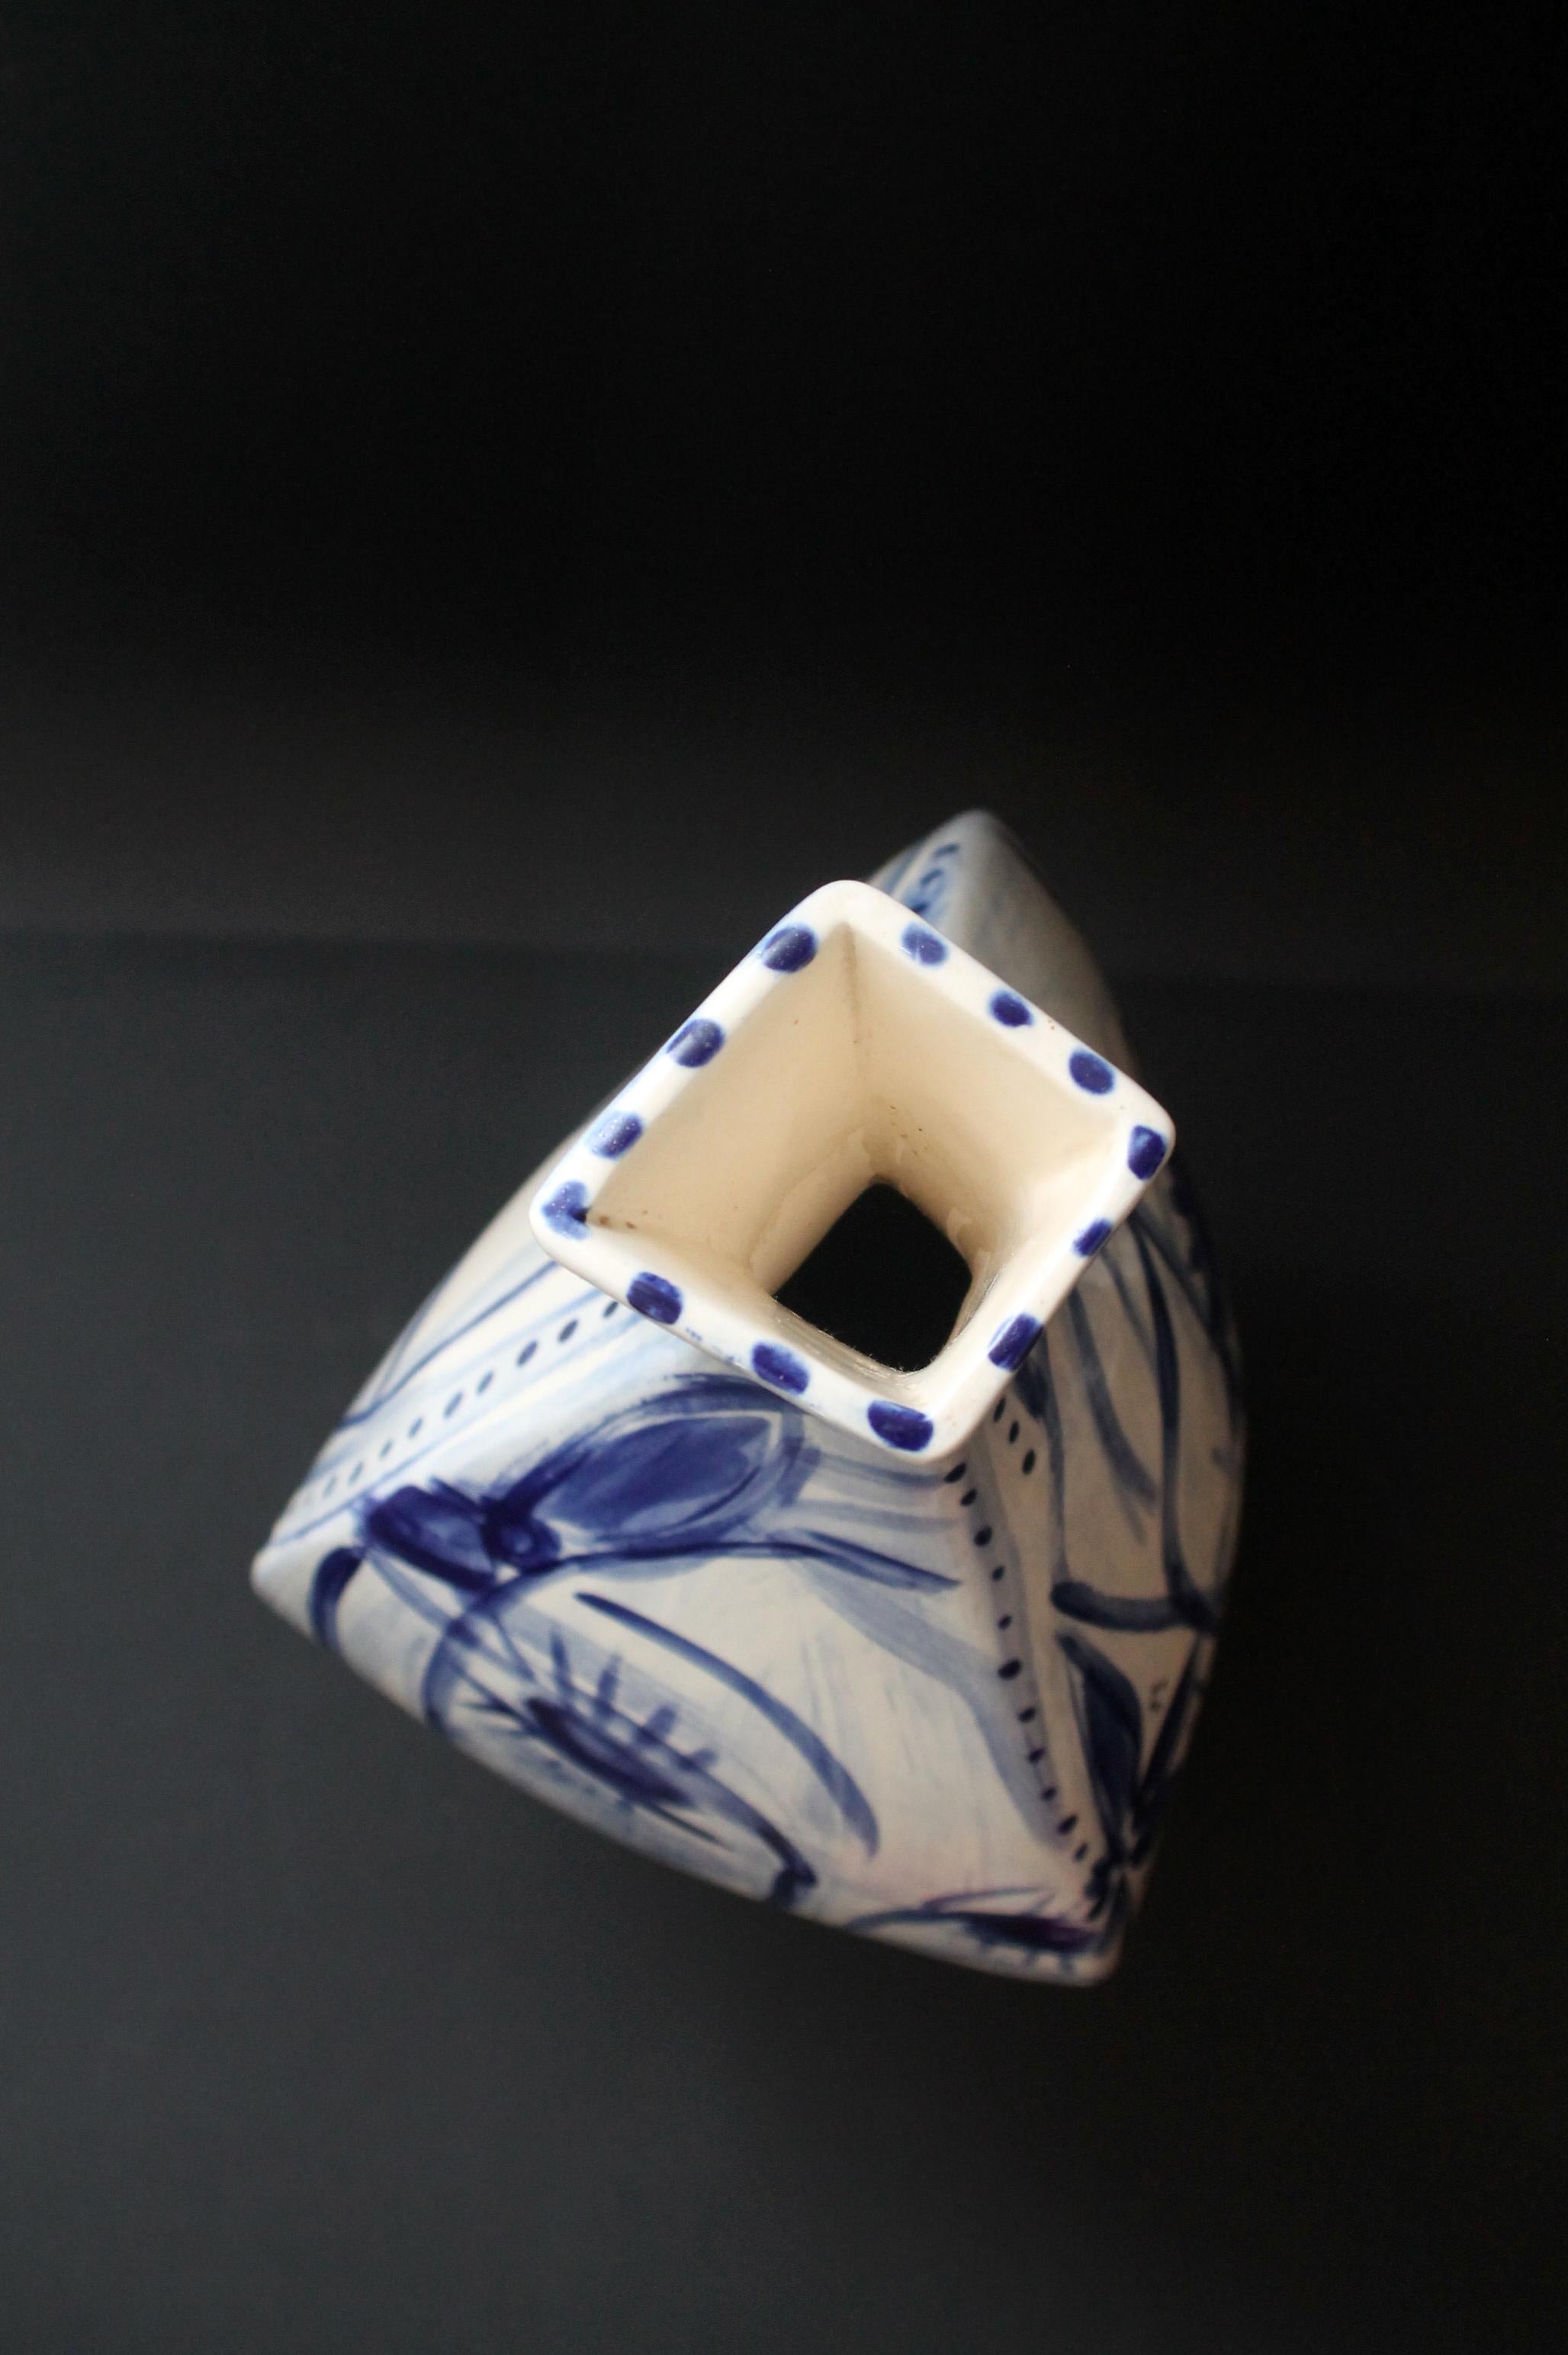 Brazilian Cris Conde )) Amorphous (hand crafted/painted) signed ceramic vase (55x23x21cm) For Sale